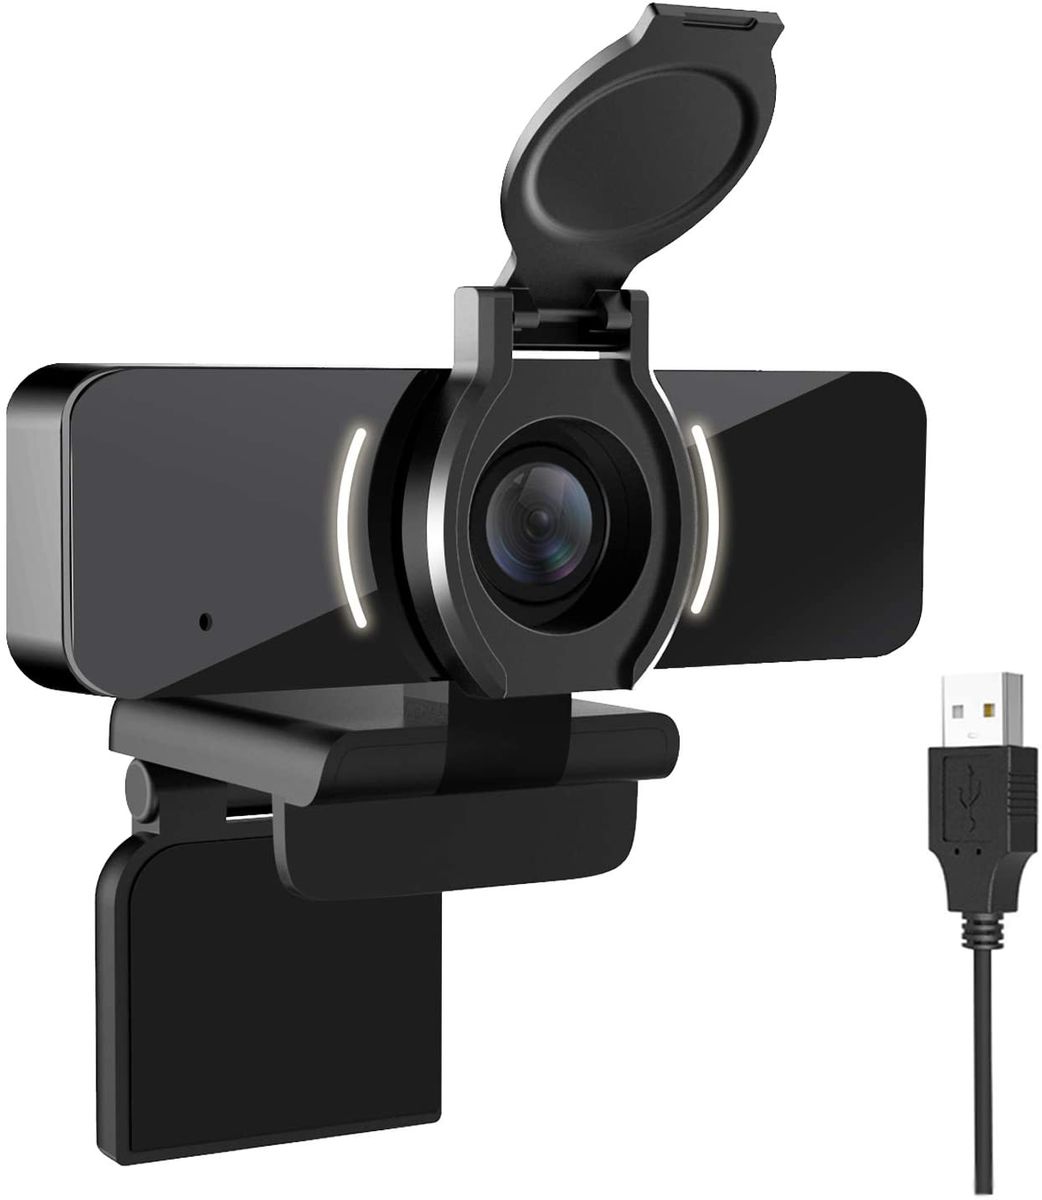 LarmTek 1080P Webcam with Microphone and Privacy Cover, Webcam USB Camera, Computer HD Streaming Webcam